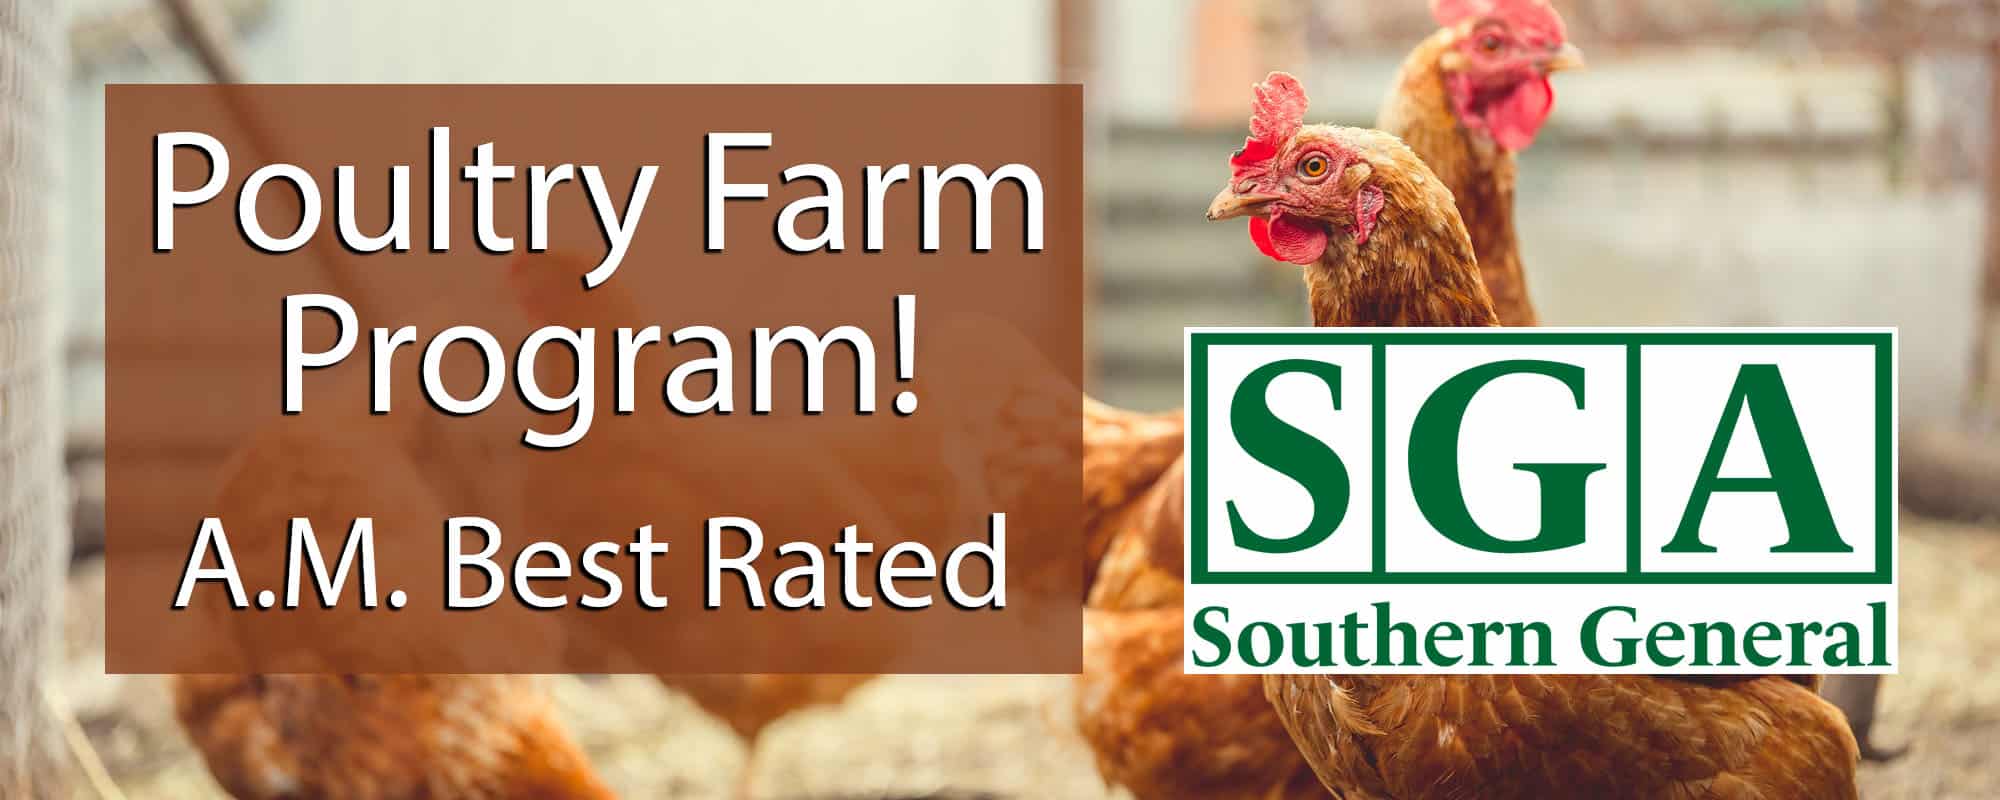 Featured image for “Poultry Farm Program!”